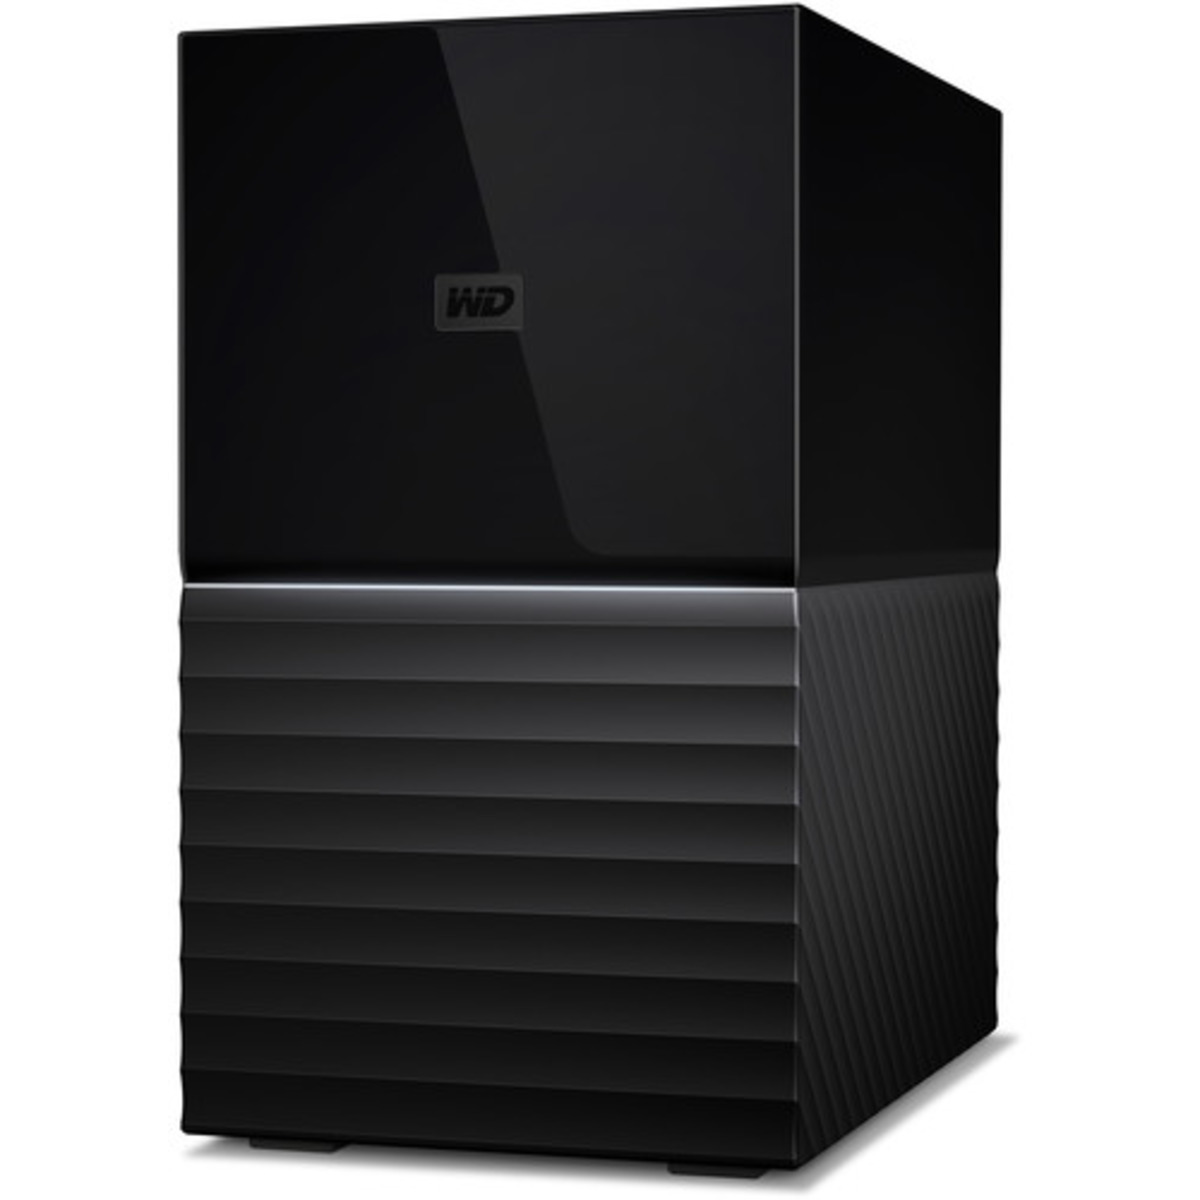 buy $869 Western Digital My Book DUO Gen 2 16tb Desktop DAS - Direct Attached Storage Device 2x8000gb Western Digital Red Plus WD80EFAX 3.5 7200rpm SATA 6Gb/s HDD NAS Class Drives Installed - Burn-In Tested - ON SALE - nas headquarters buy network attached storage server device das new raid-5 free shipping usa christmas new year holiday sale My Book DUO Gen 2